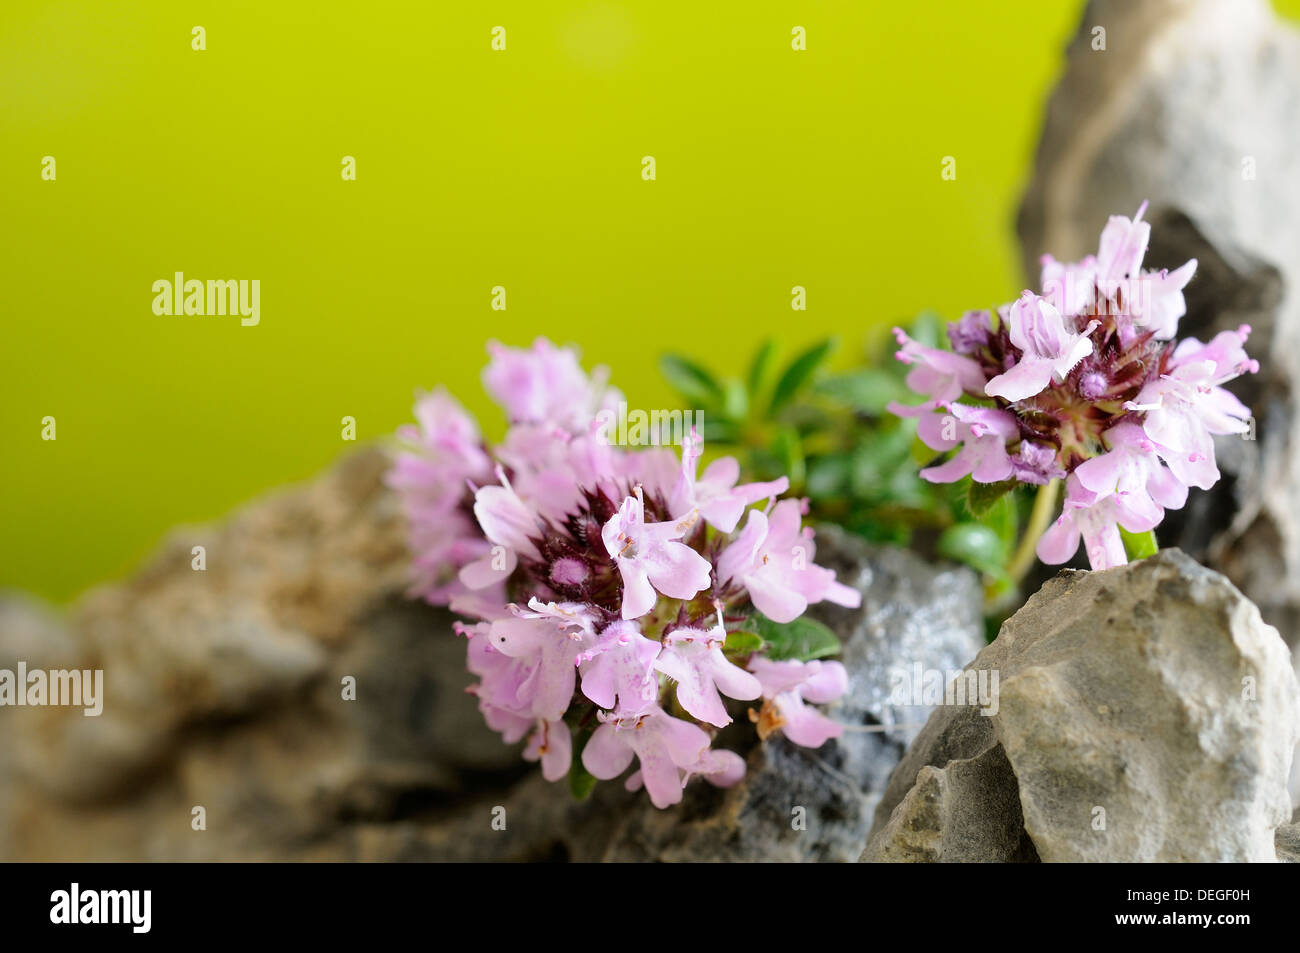 Horizontal portrait of thyme, Thymus praecox, flowers with out focus background. Stock Photo